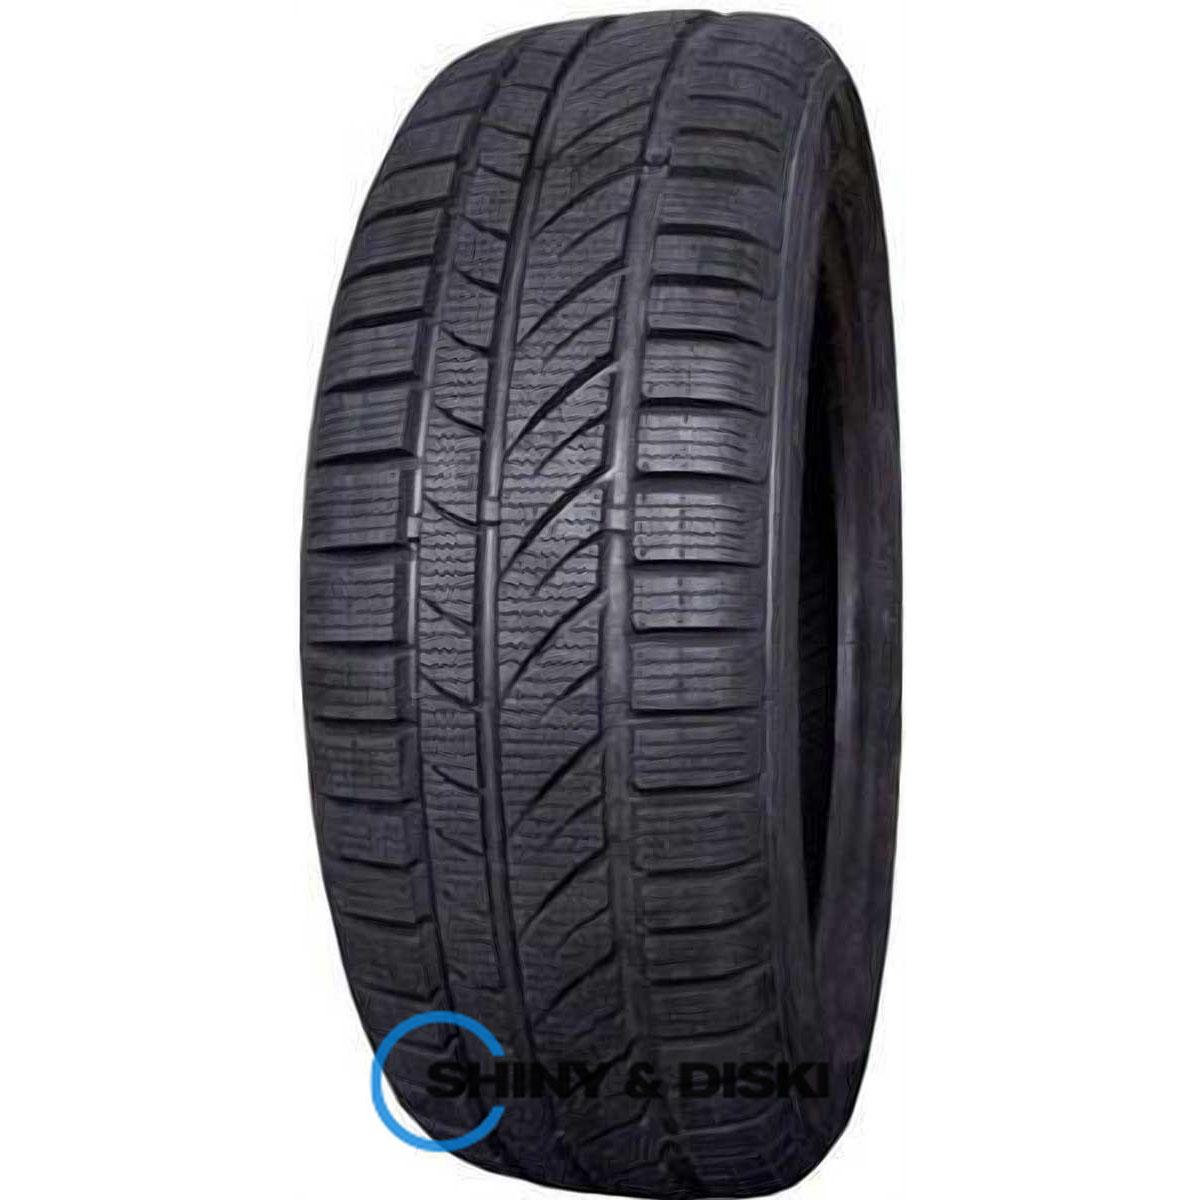 infinity inf-049 165/70 r13 79t